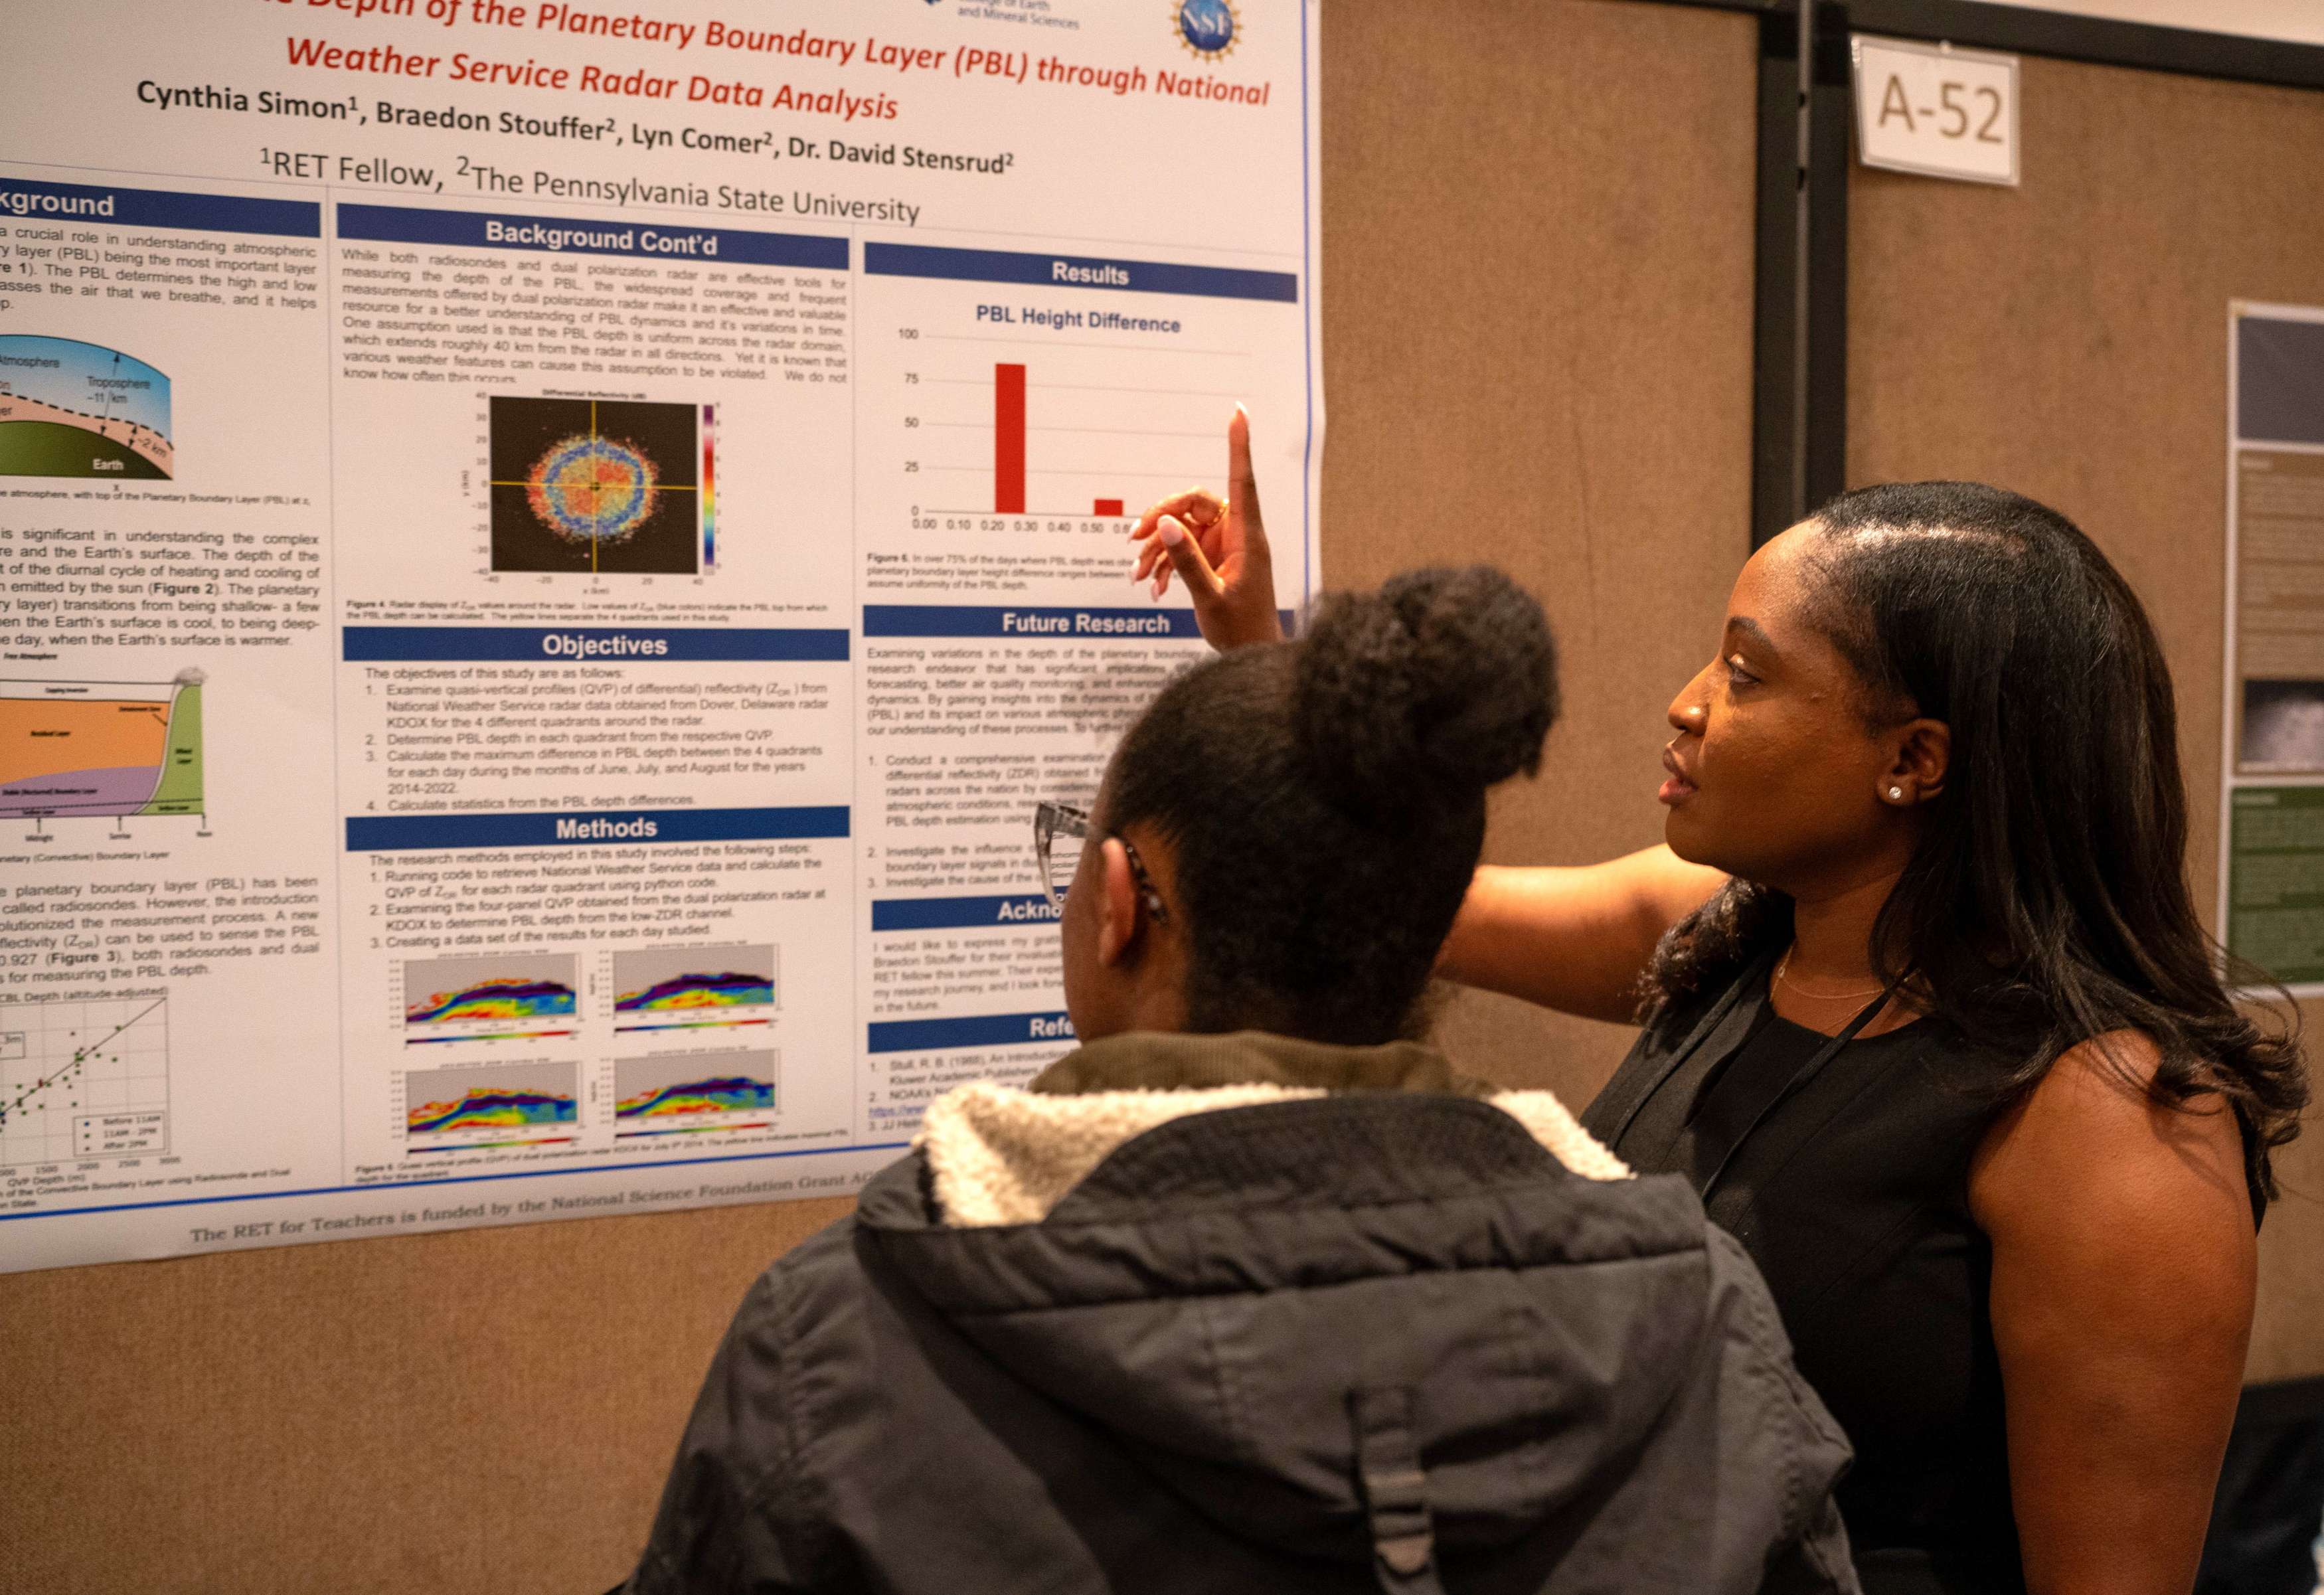 Two females examining a research poster titled at a scientific conference. The poster includes various charts, graphs, and a section marked "Background Case Study.